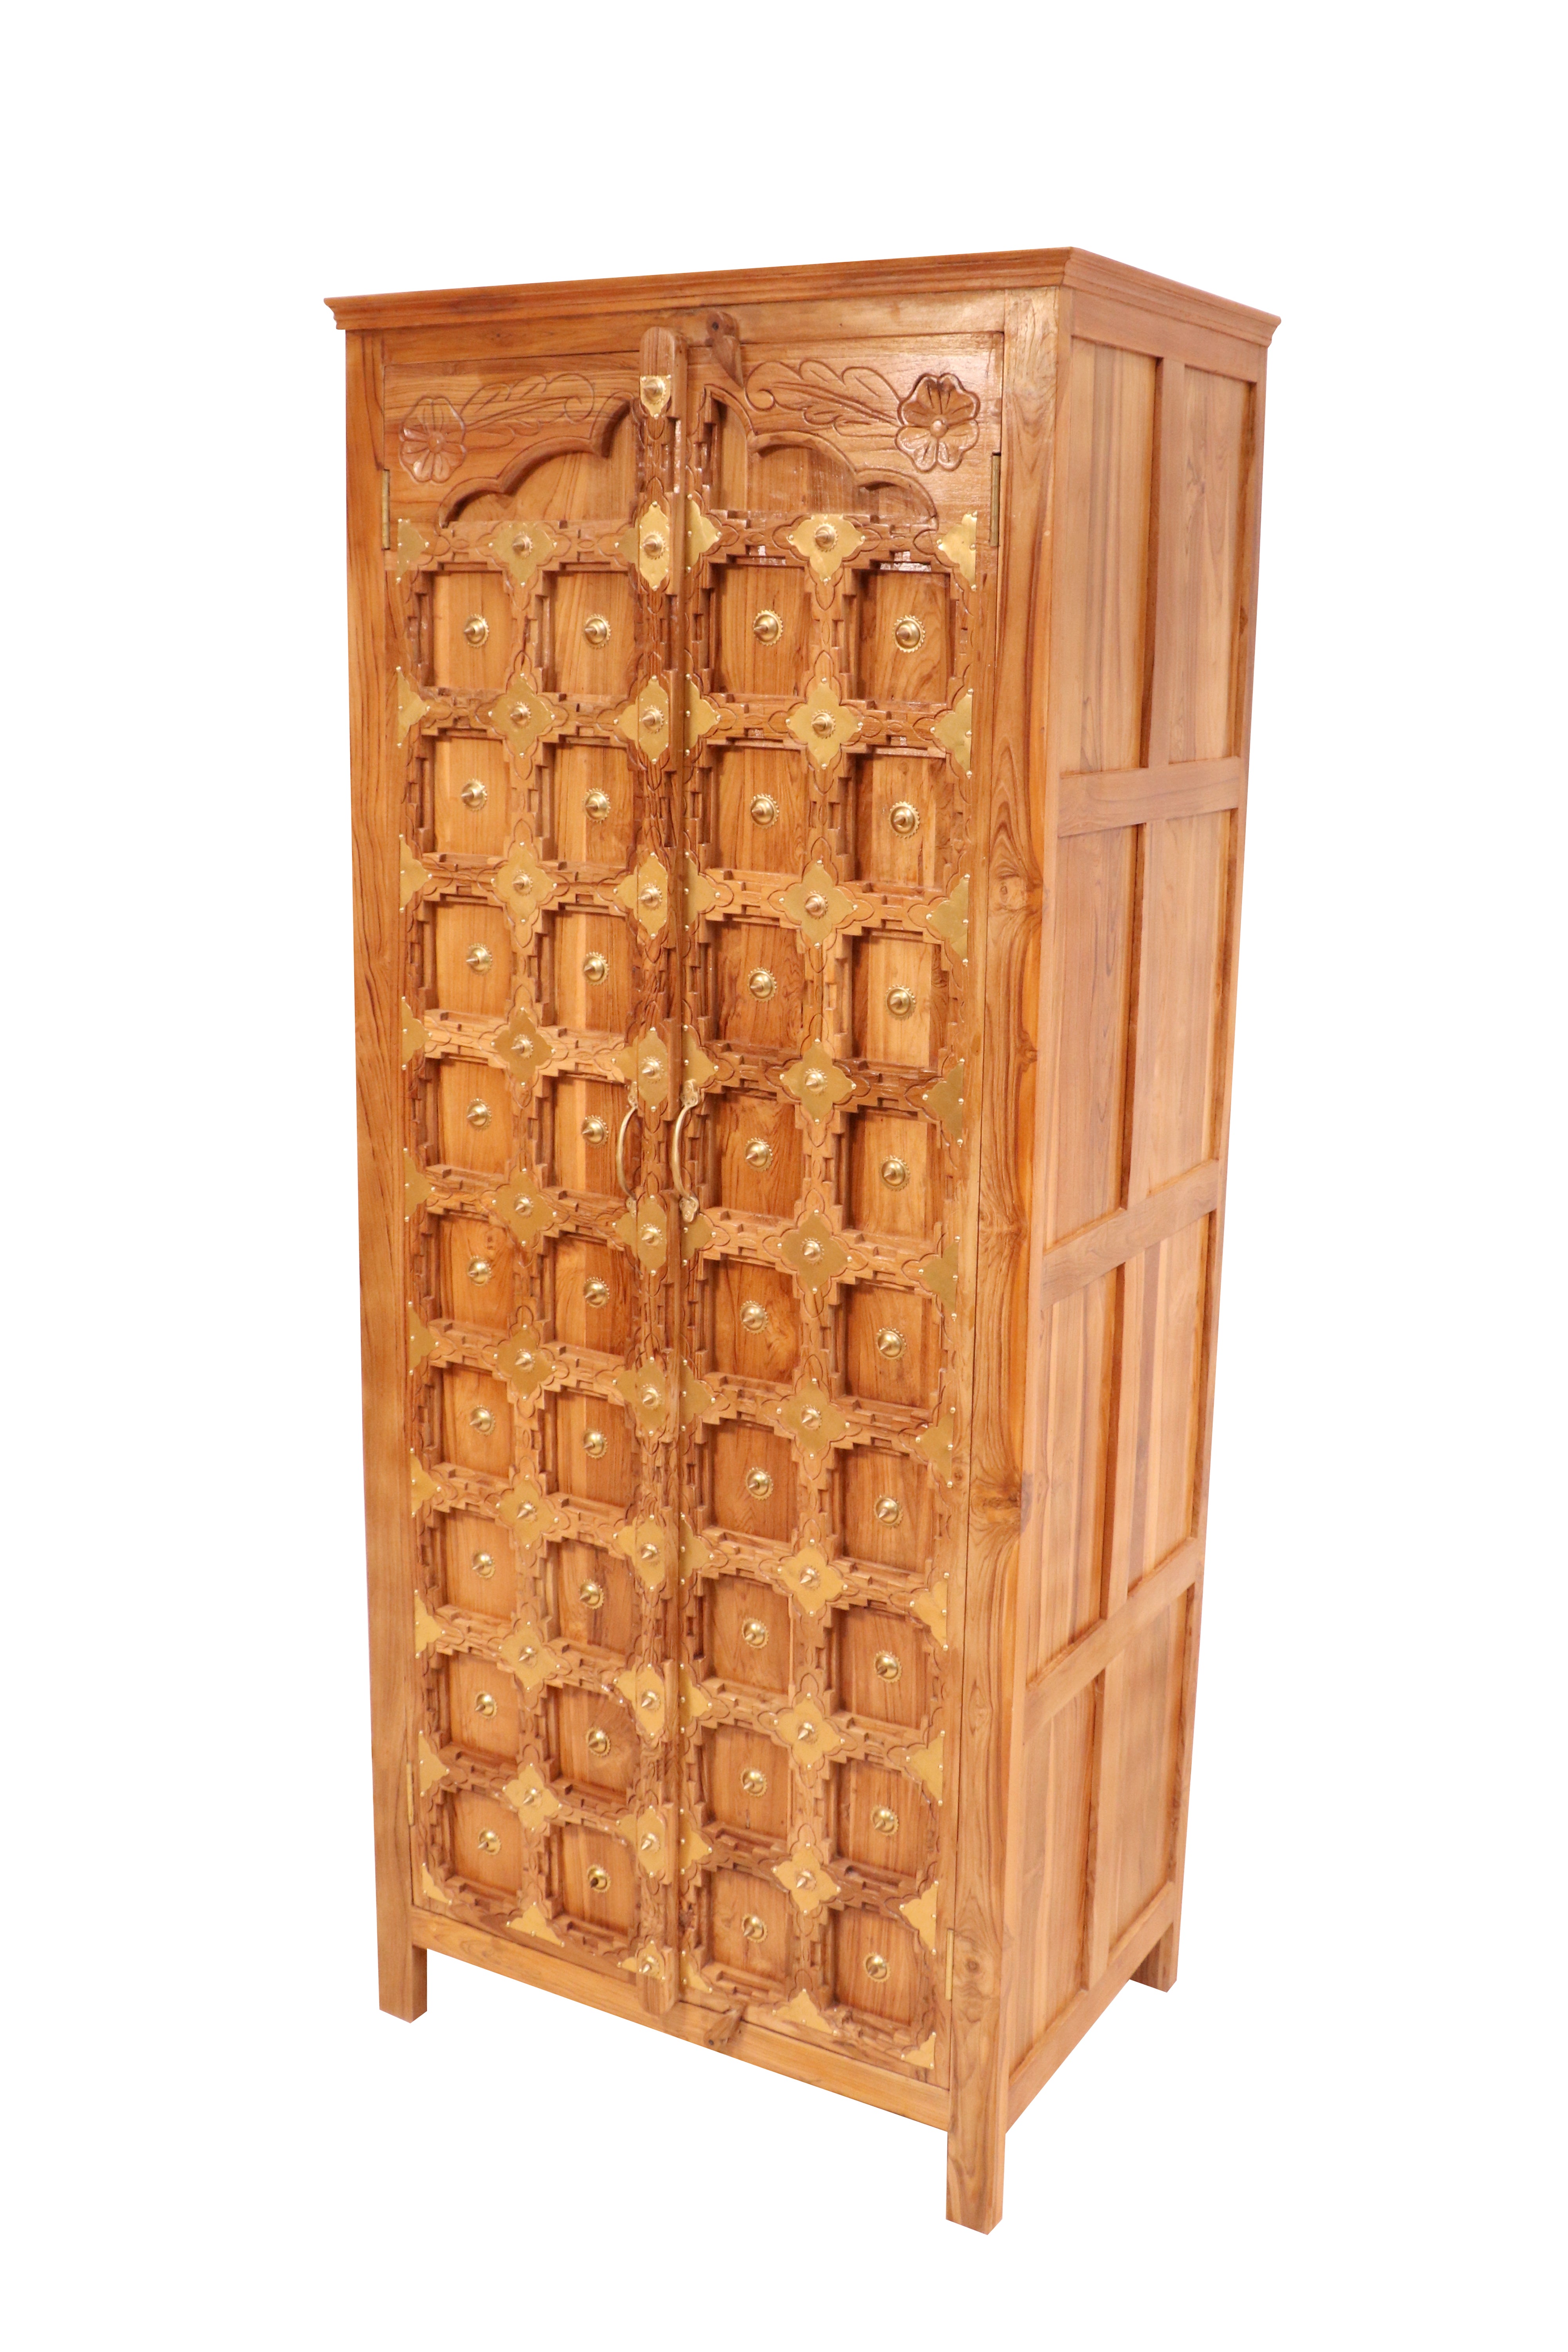 Classic Multiple Storage & Block Style Handmade Large Wooden Cupboard for Home Wardrobe